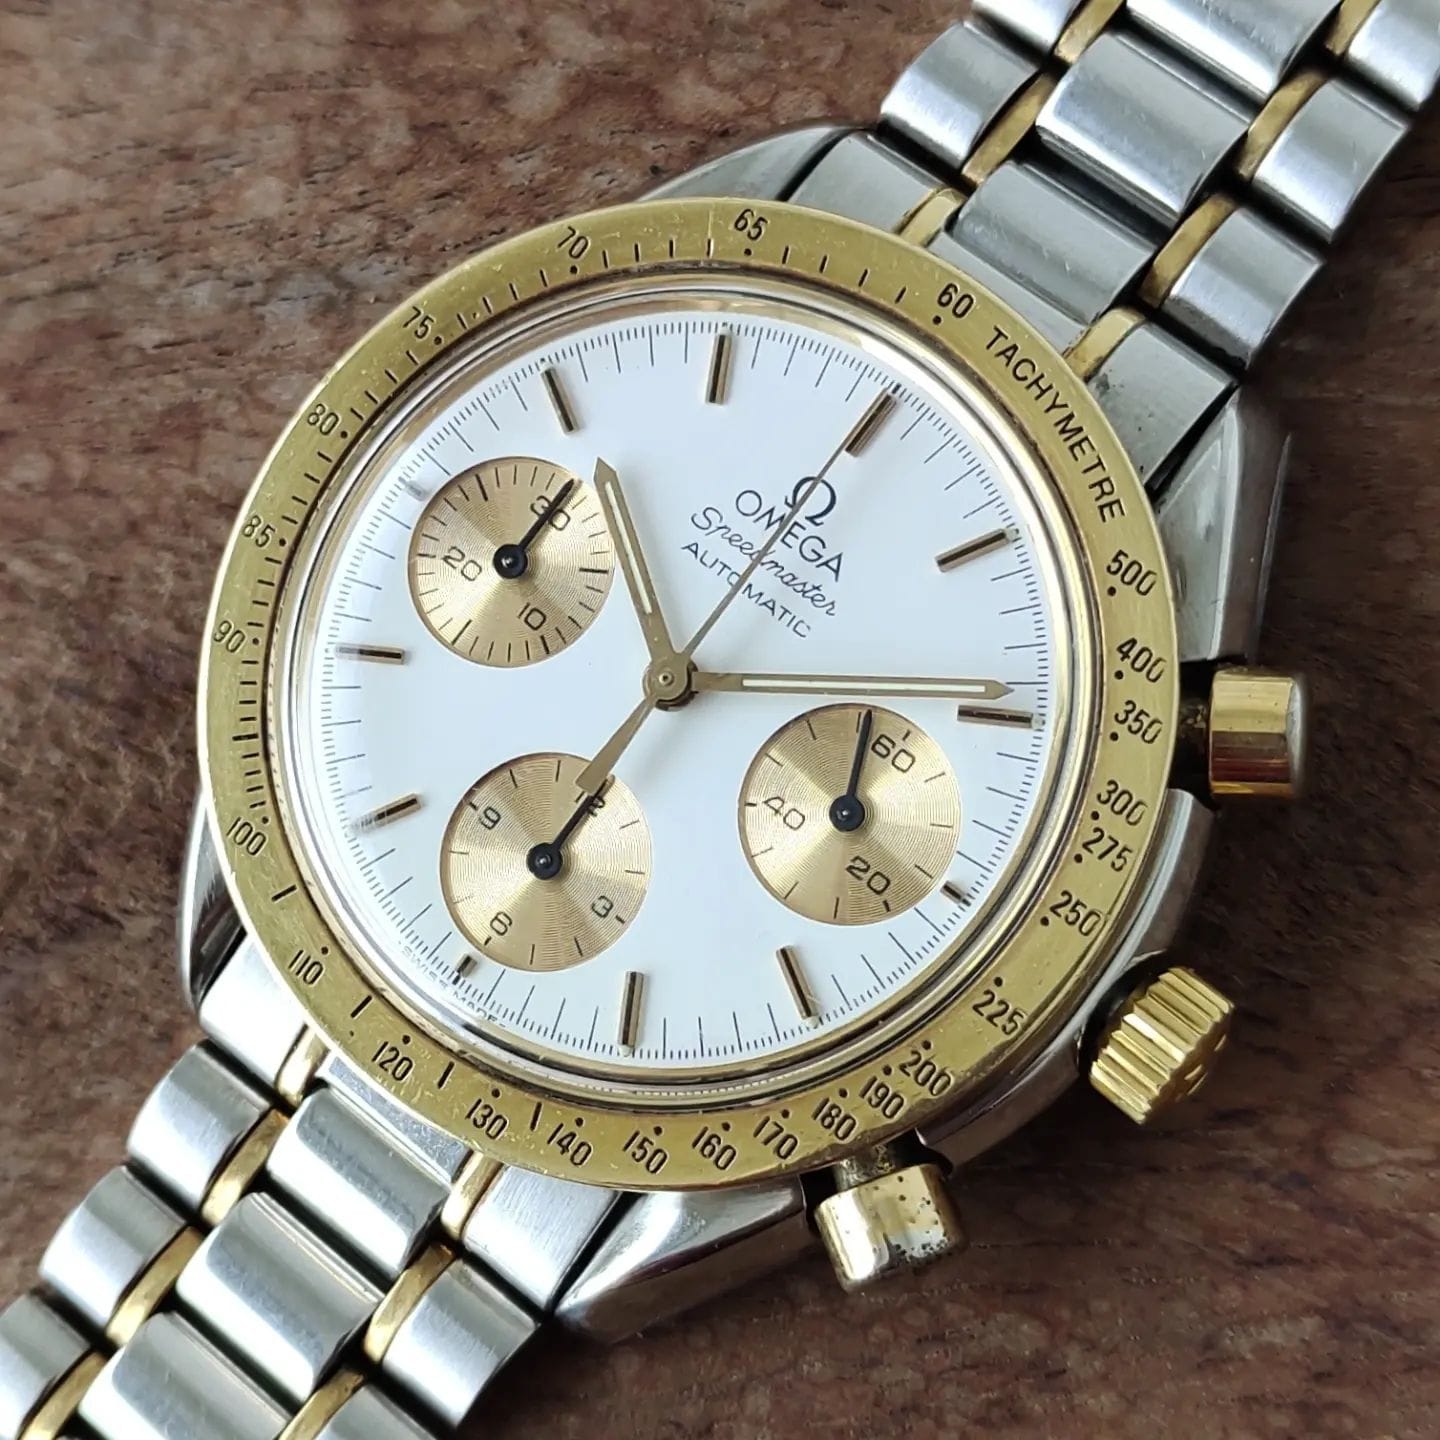 White dial with golden bezel. Gold minute counter and chronograph subdials. Golden applied indices and hands. Omega Speedmaster Reduced DA 175.0033